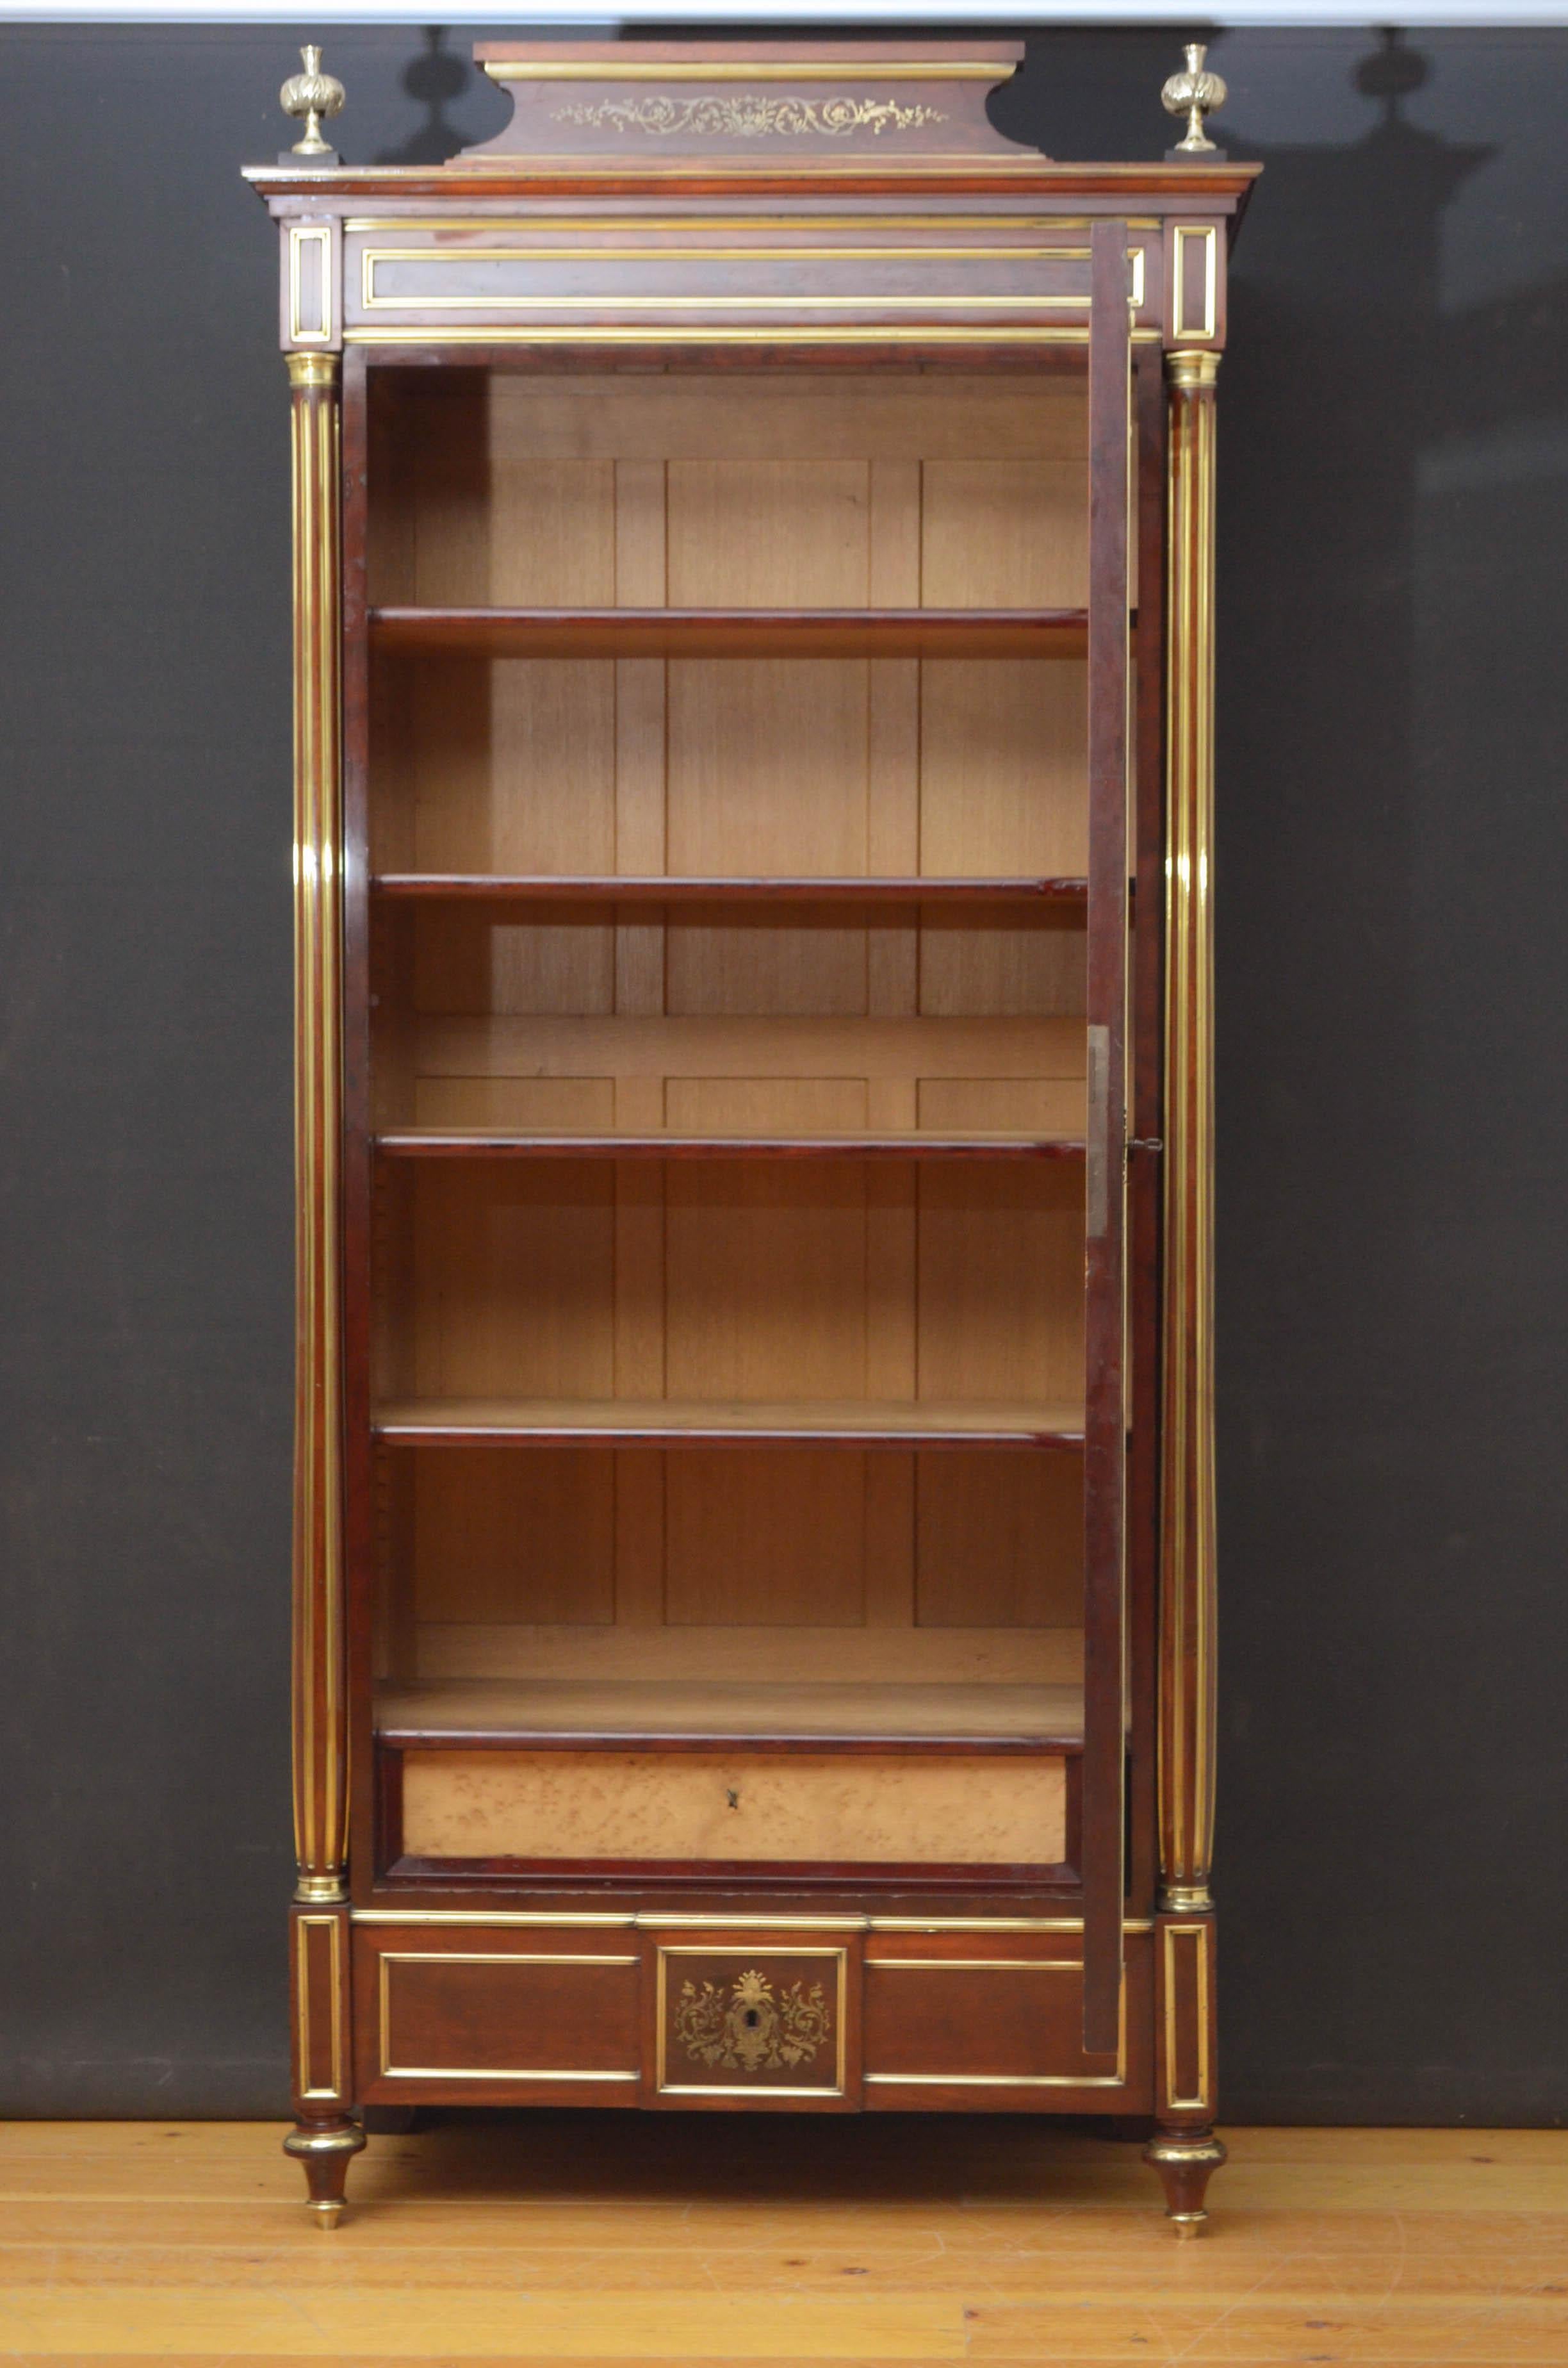 Sn4807 fantastic 19th century brass inlaid bookcase in mahogany, having brass inlaid cornice flanked by brass finials above beveled edge glazed doors fitted with original working lock and a key and enclosing 4 height adjustable shelves and a drawer,